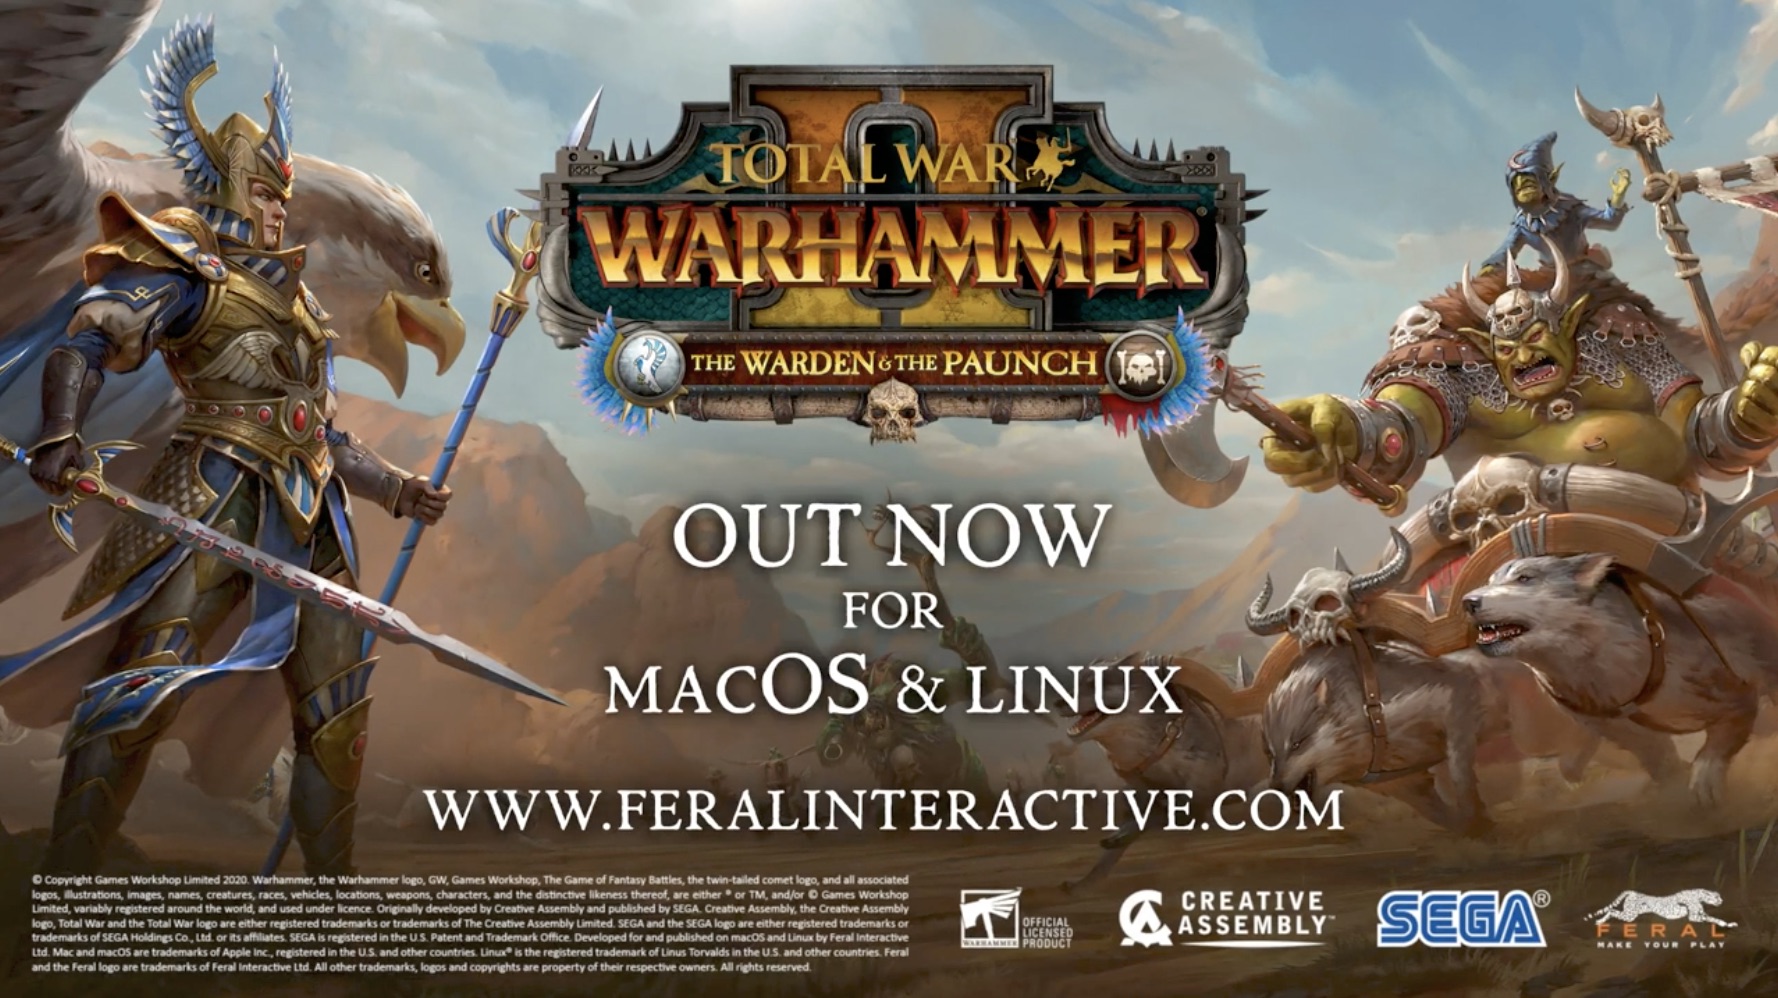 Total War: WARHAMMER II – The Warden & The Paunch DLC Is Out Now for Linux